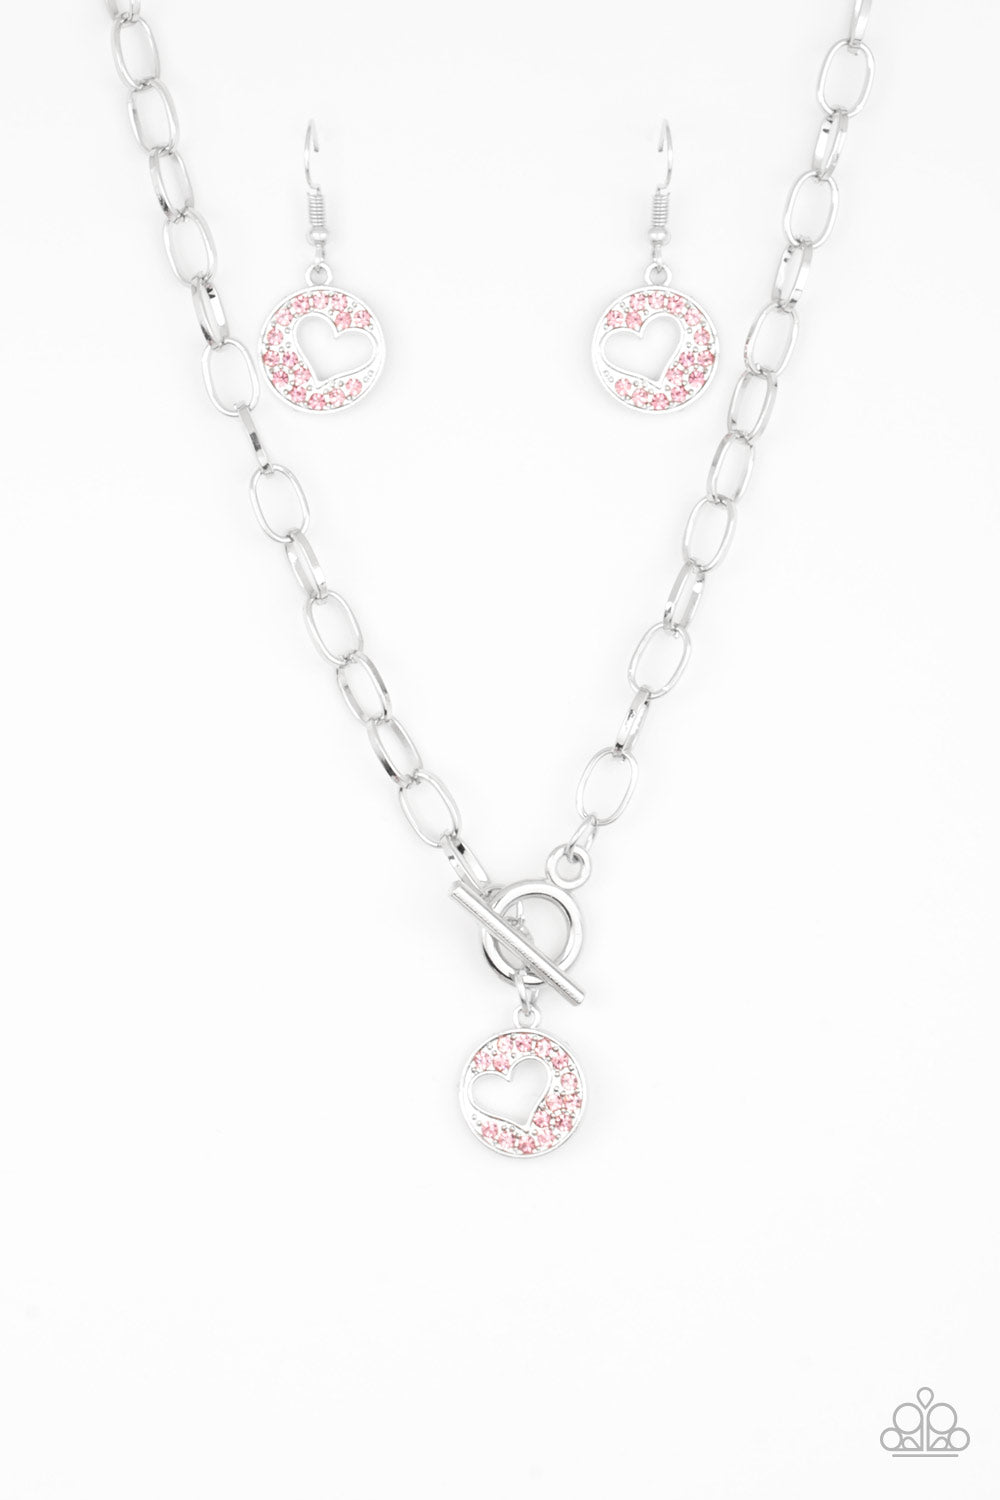 Paparazzi Accessories - Heartbeat Retreat - Pink & Silver Necklace